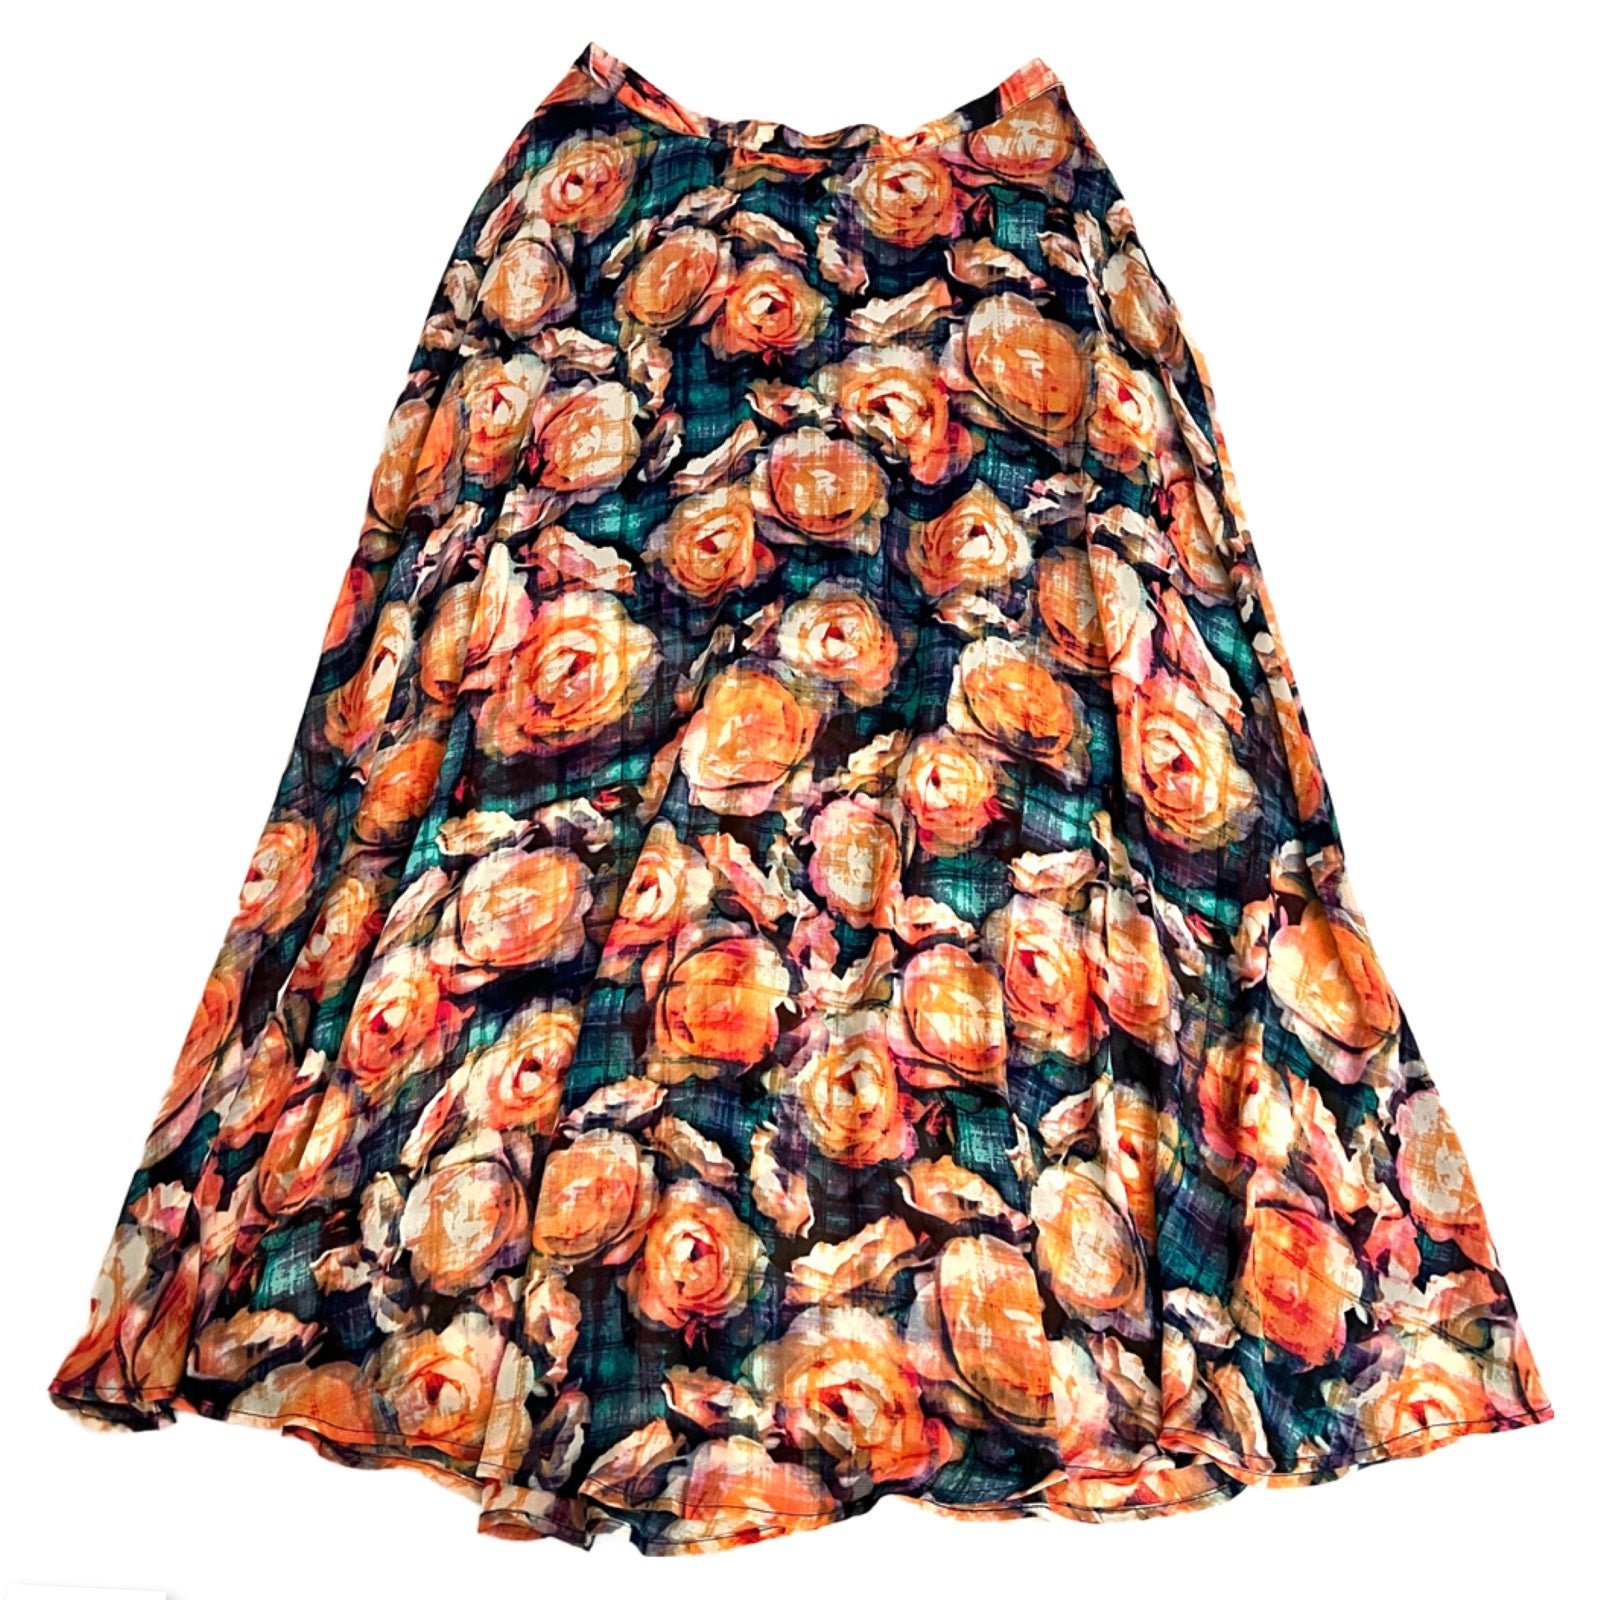 Great DECREE Floral Print Maxi Skirt with Side Slit / S